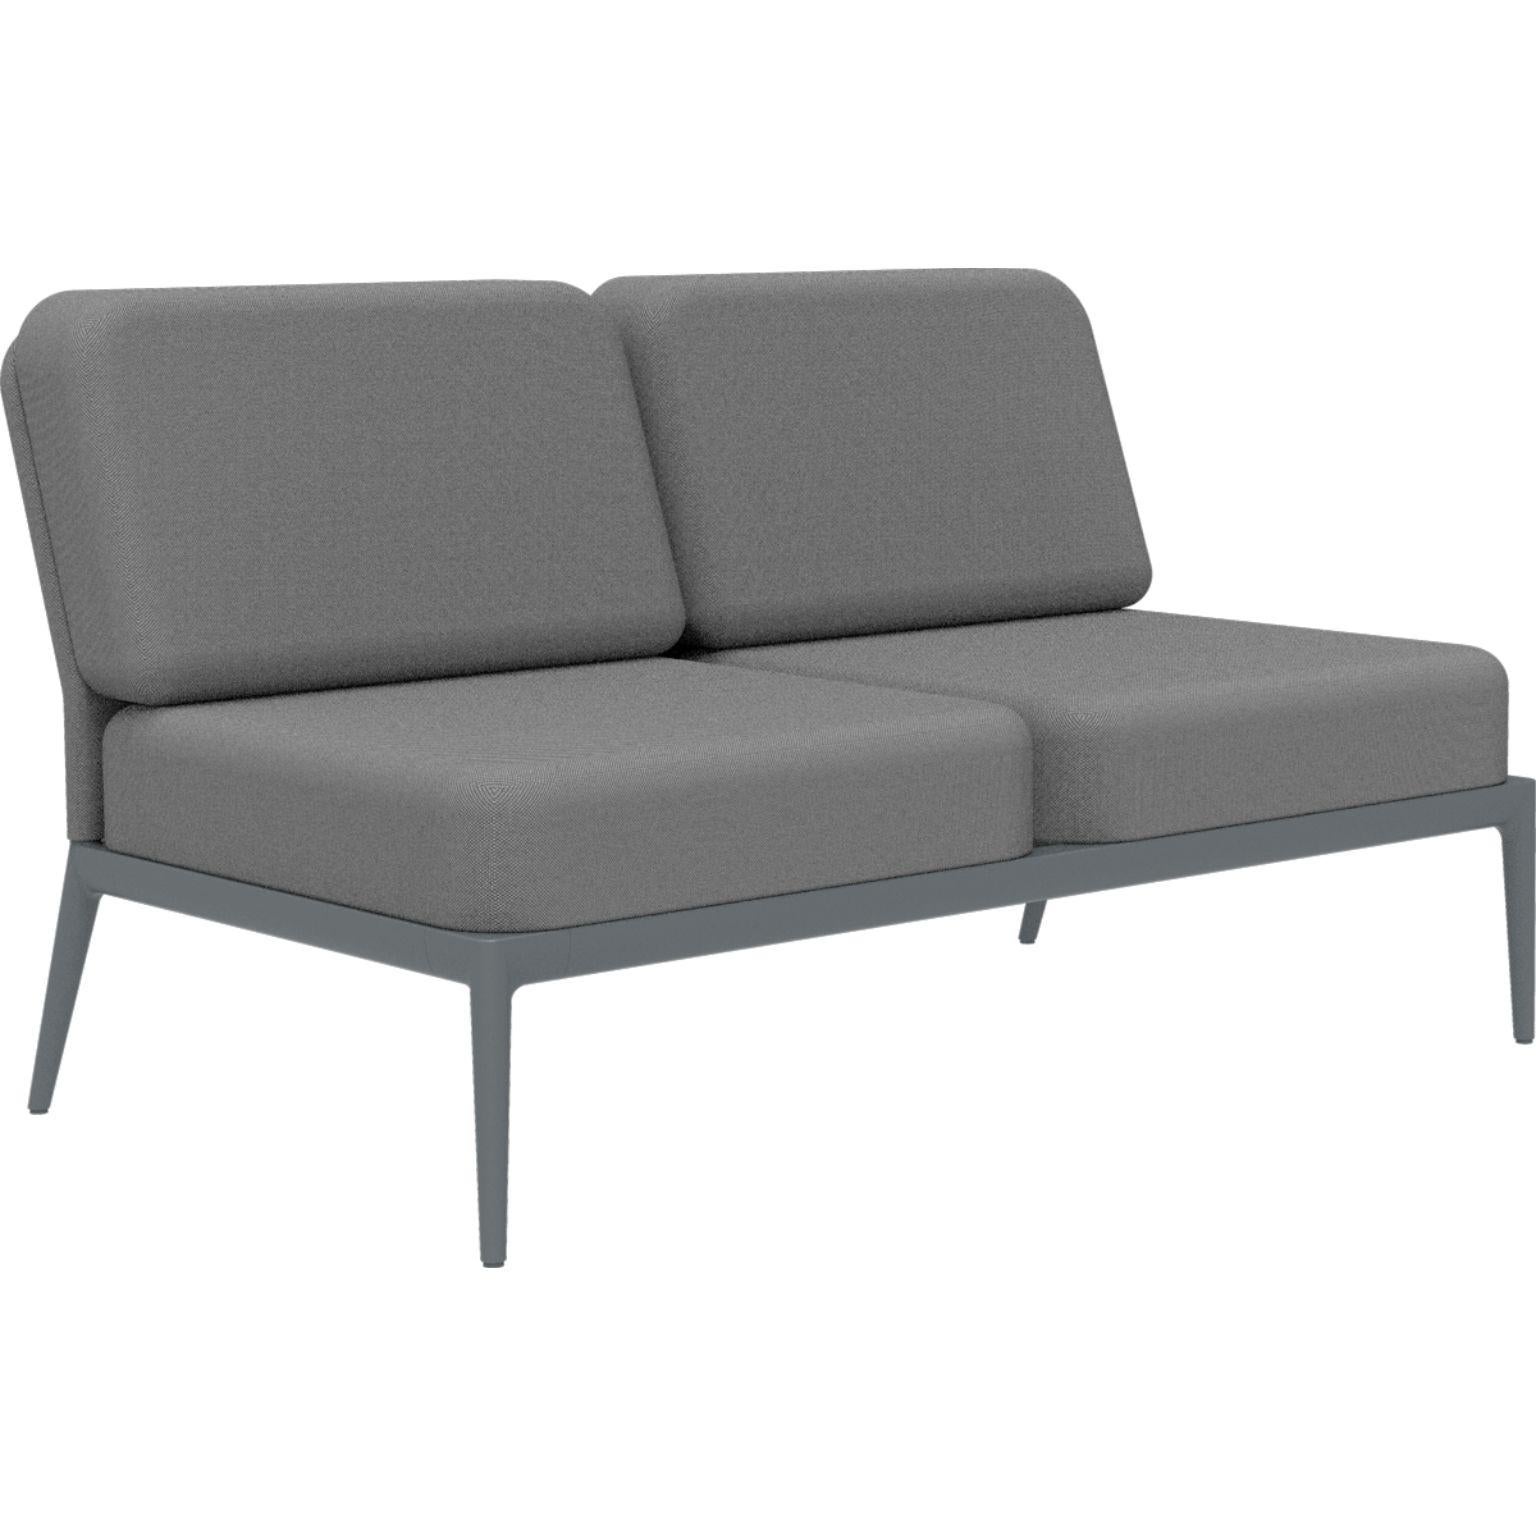 Cover Grey Double Central modular sofa by MOWEE
Dimensions: D83 x W136 x H81 cm (seat height 42 cm).
Material: Aluminum and upholstery.
Weight: 27 kg.
Also available in different colors and finishes.

An unmistakable collection for its beauty